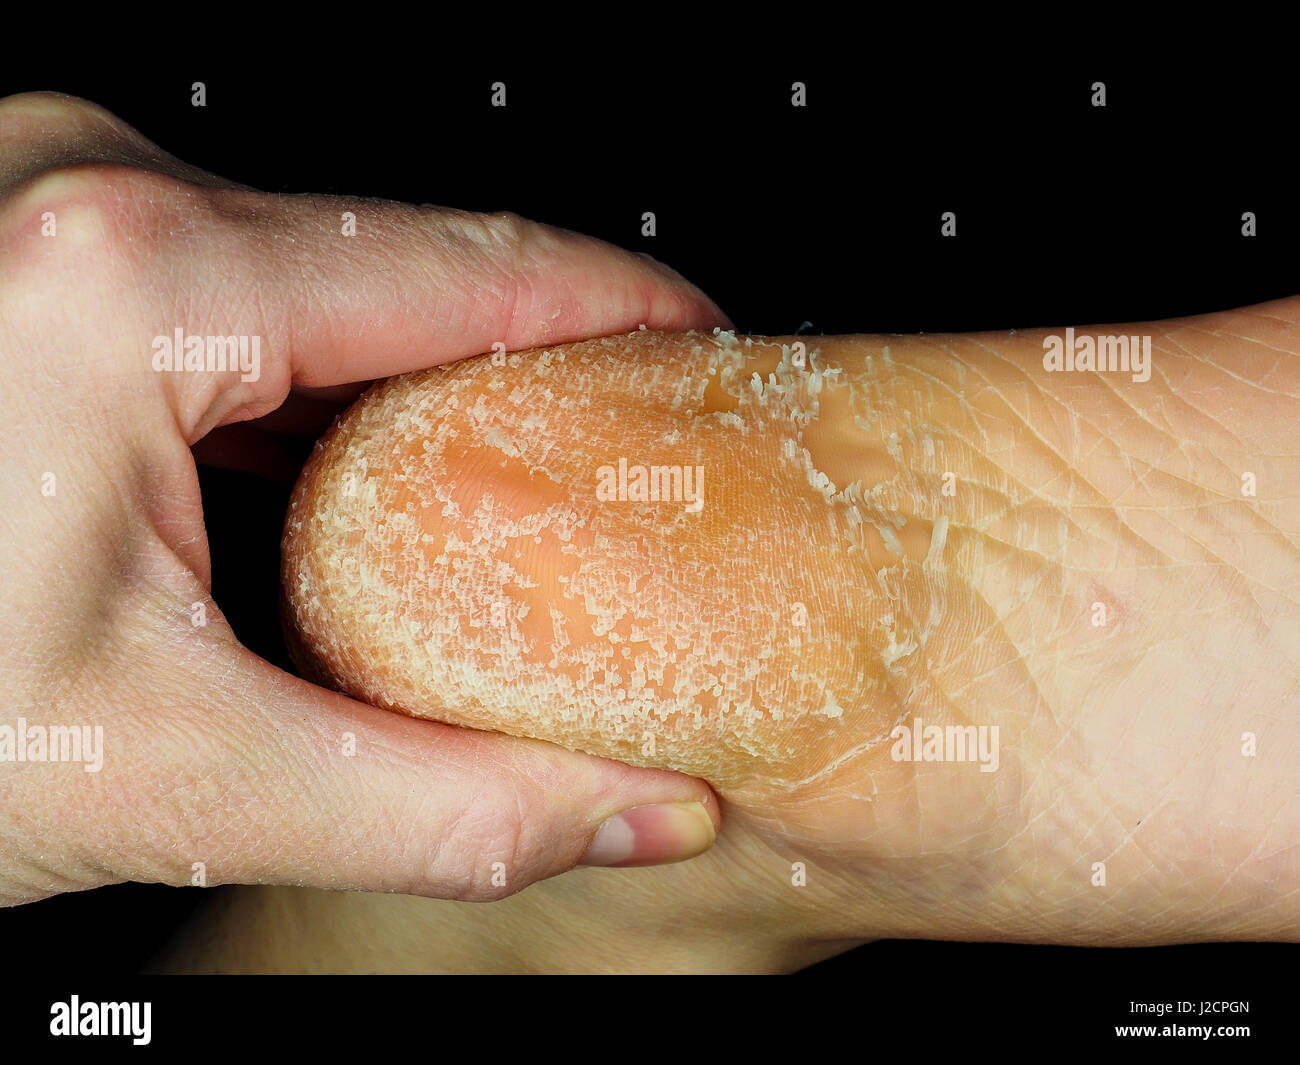 Skin peeling off from heel of an adult person, examined by podiatrist,  towards black Stock Photo - Alamy